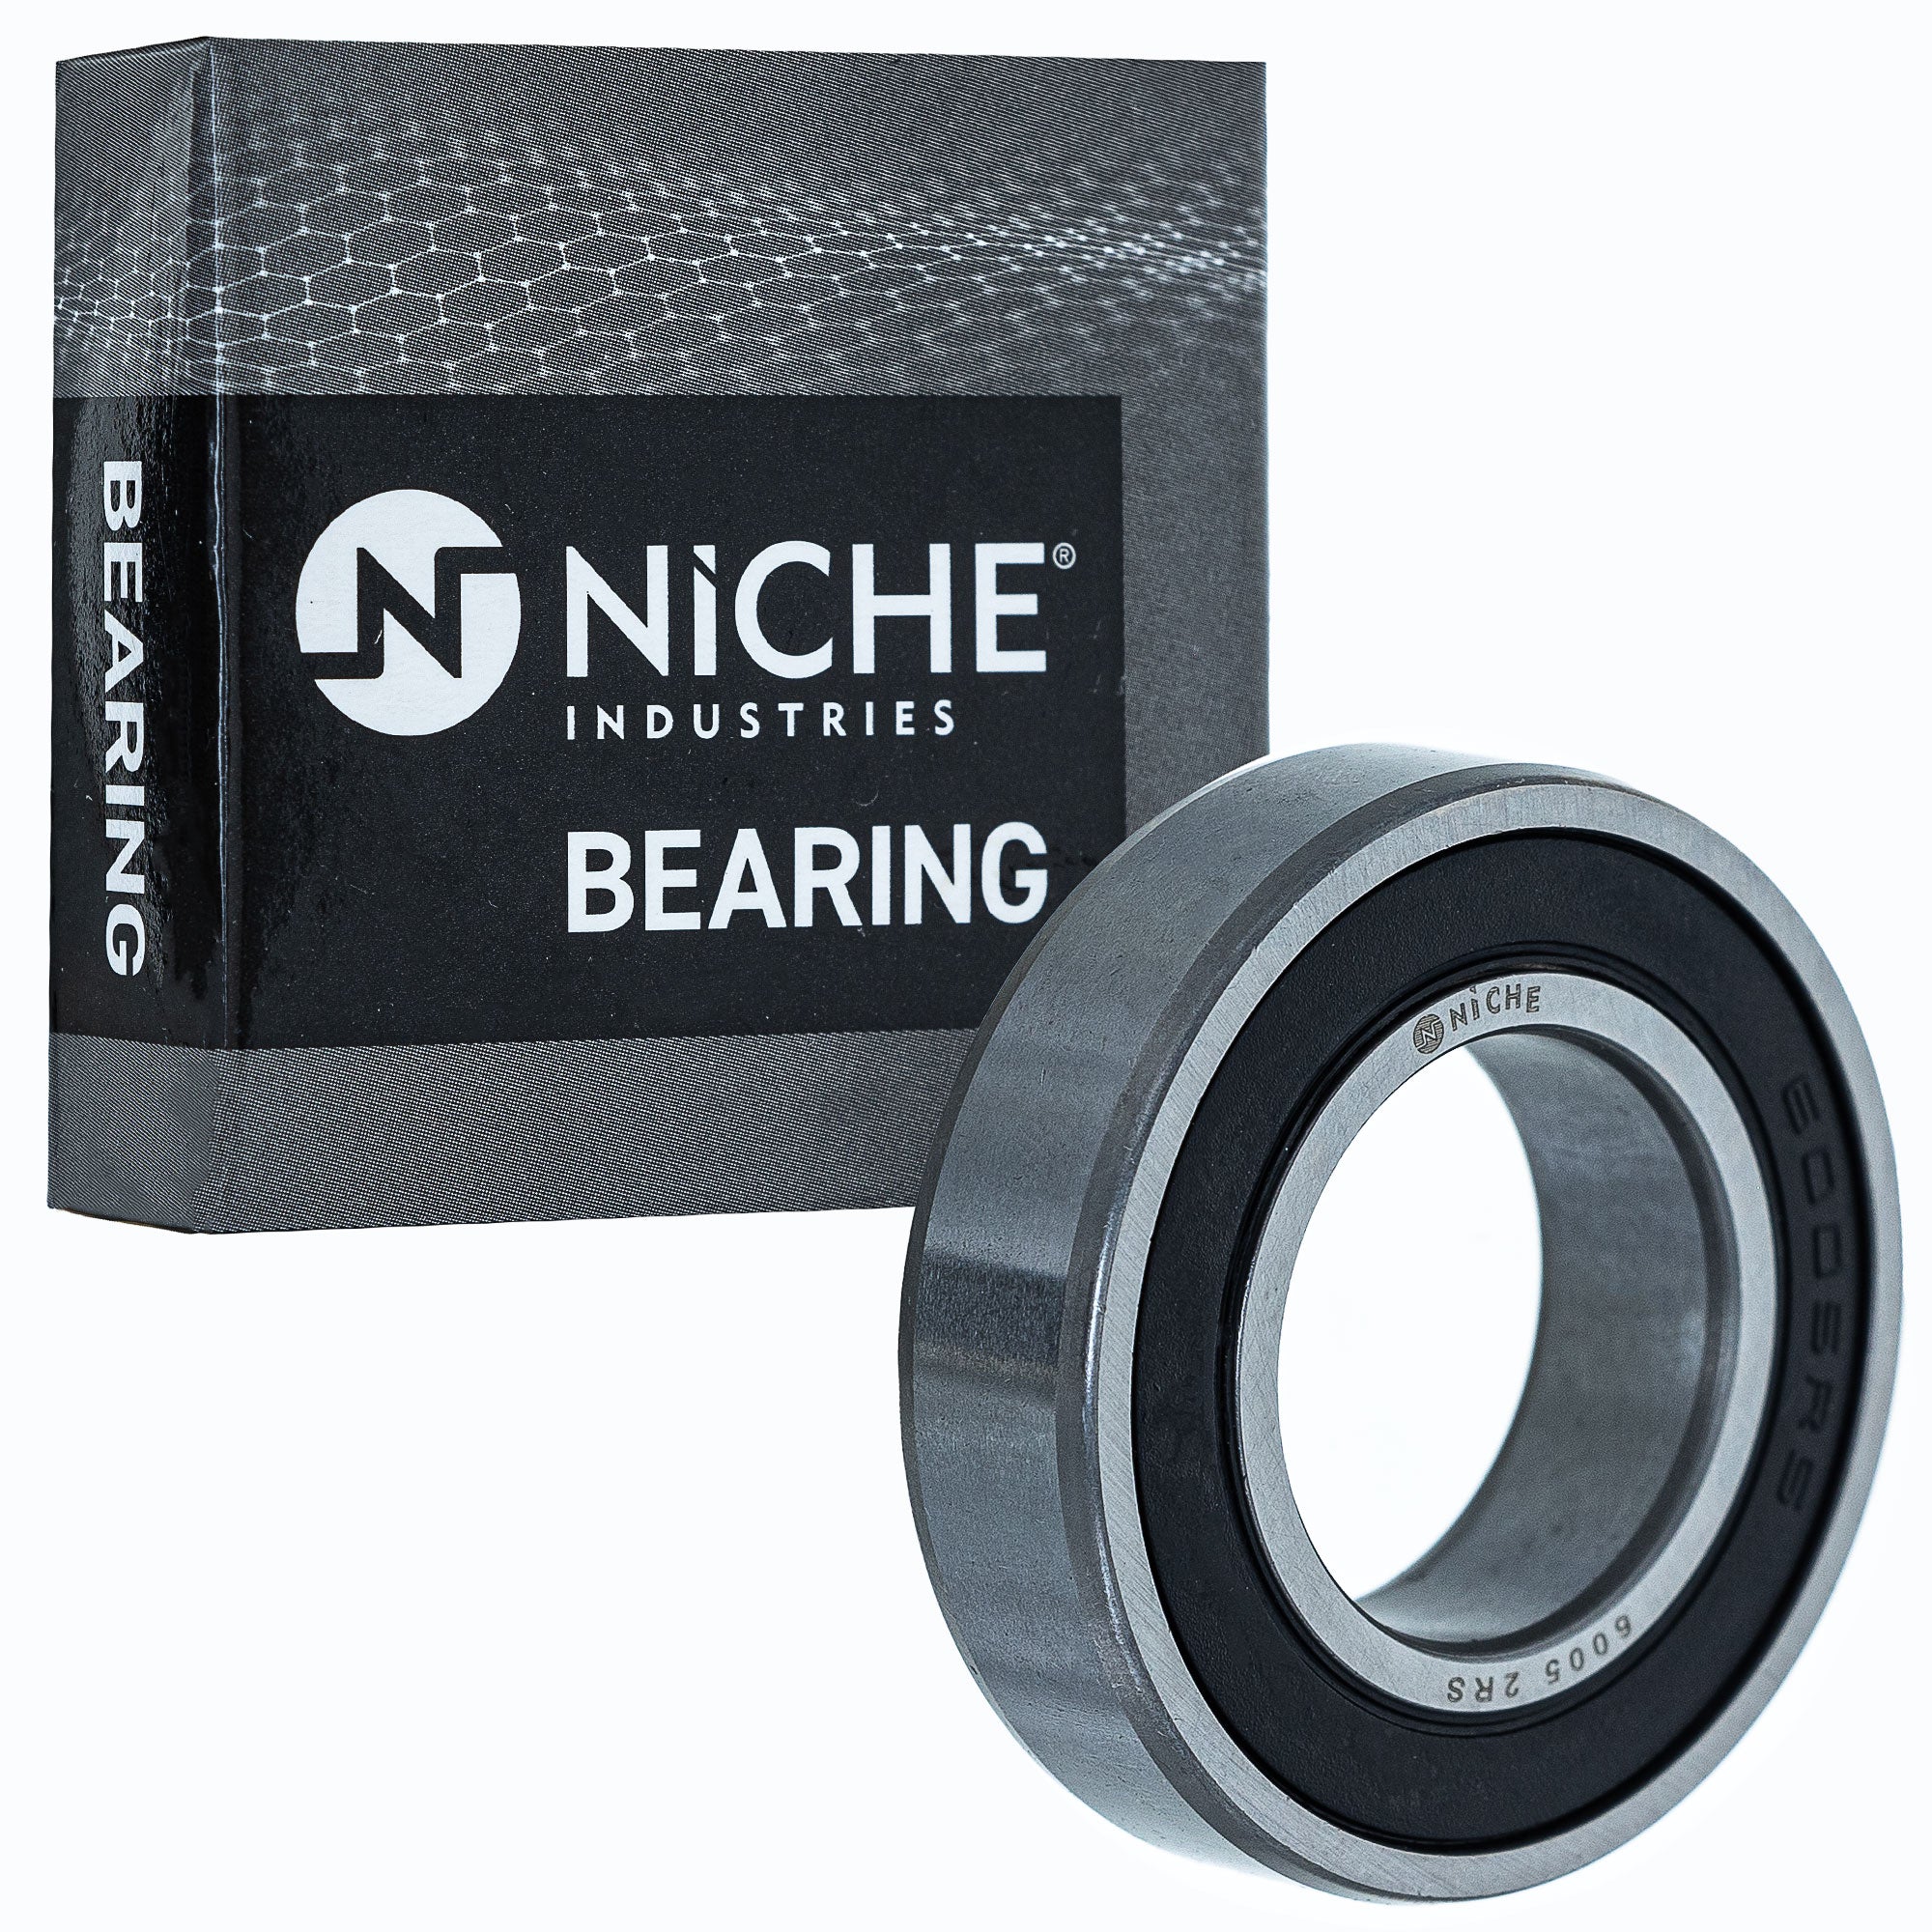 NICHE 519-CBB2234R Bearing 2-Pack for zOTHER Trophy Trident Tiger